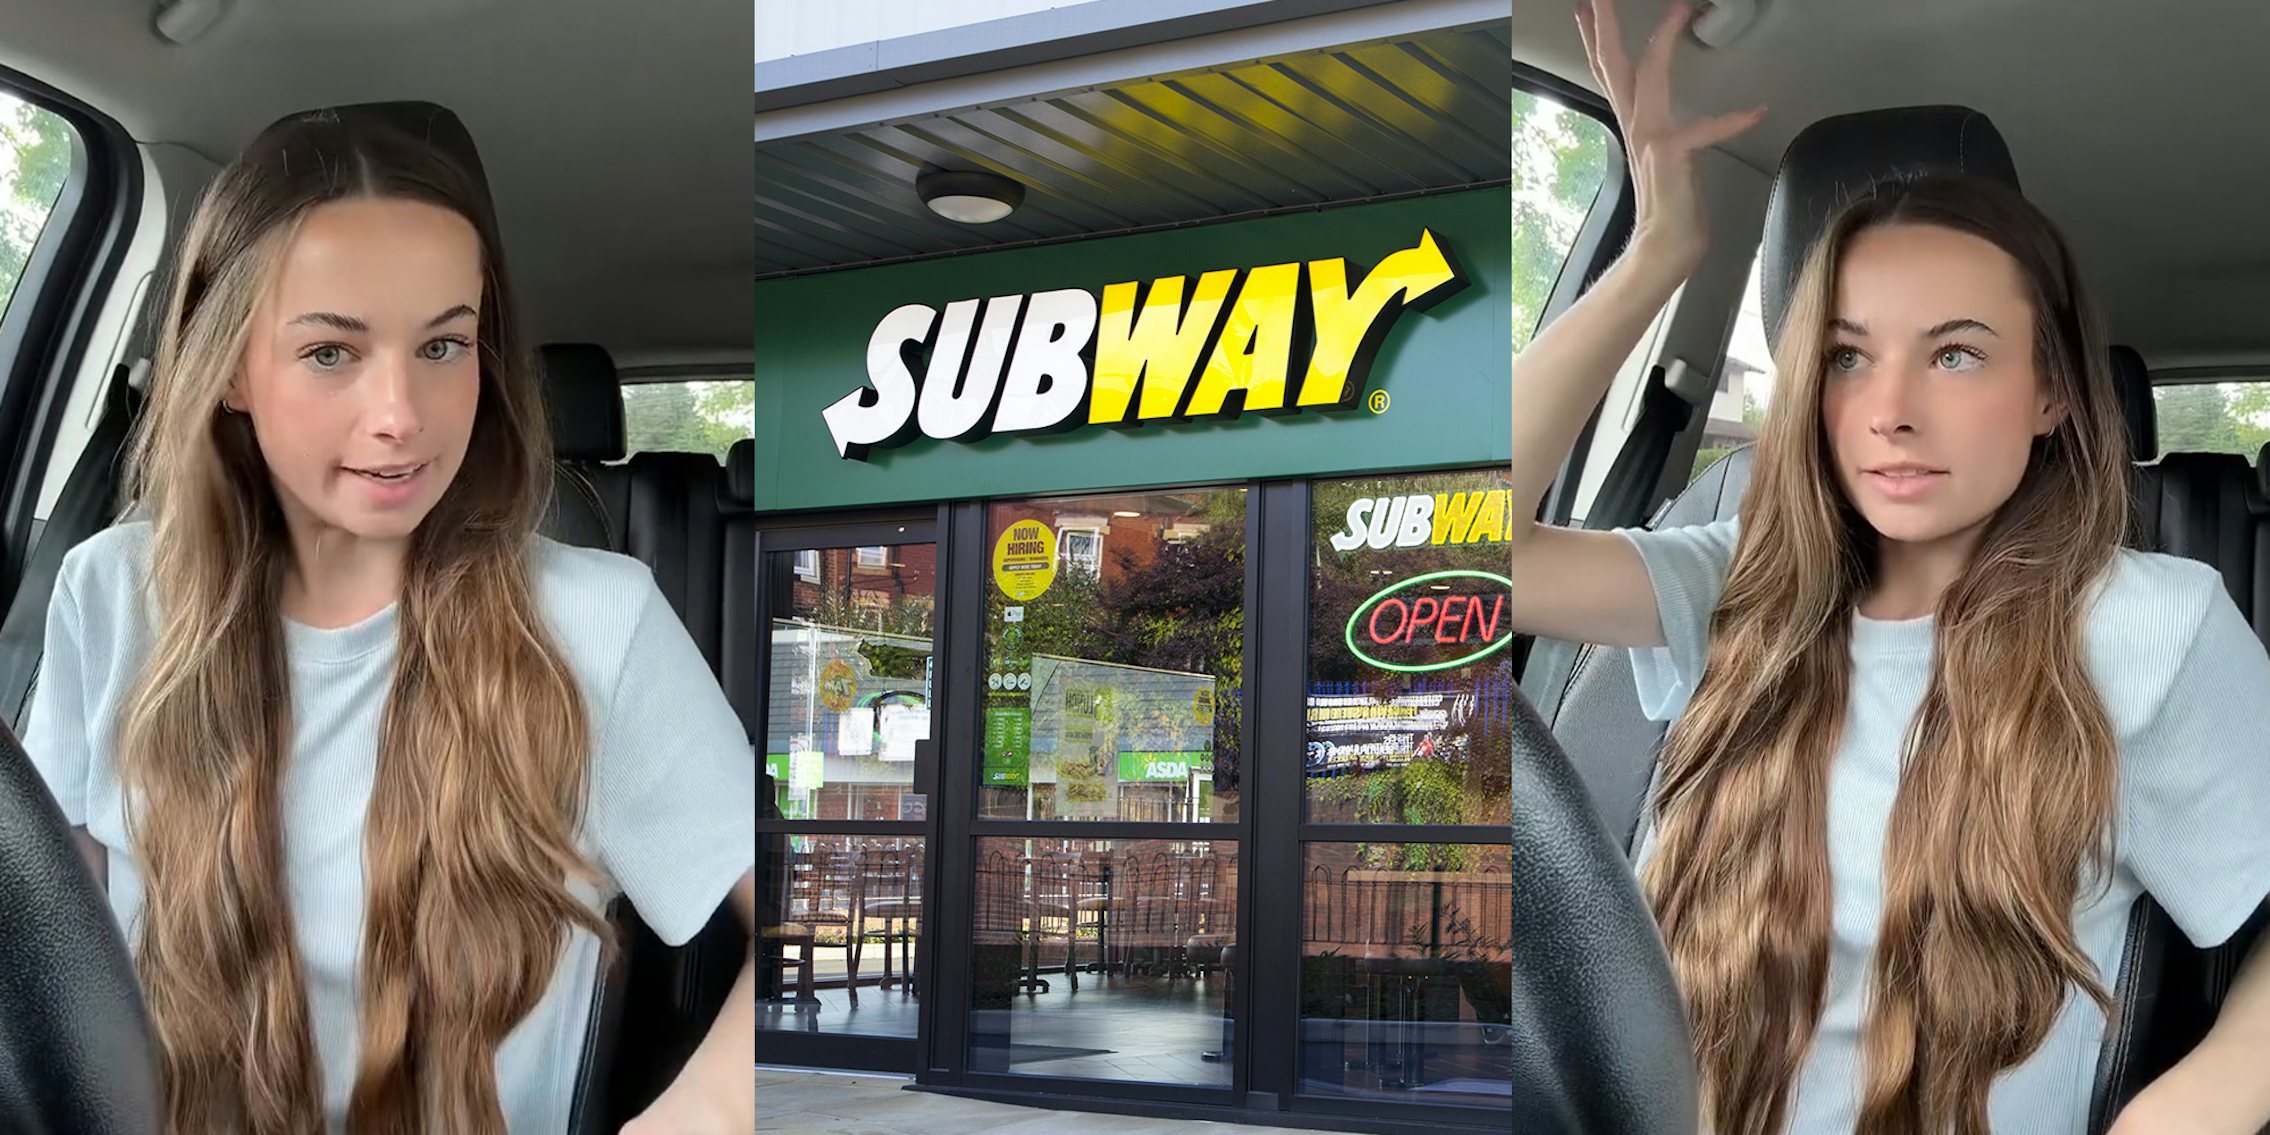 Subway customer questions tipping on Subway sandwiches